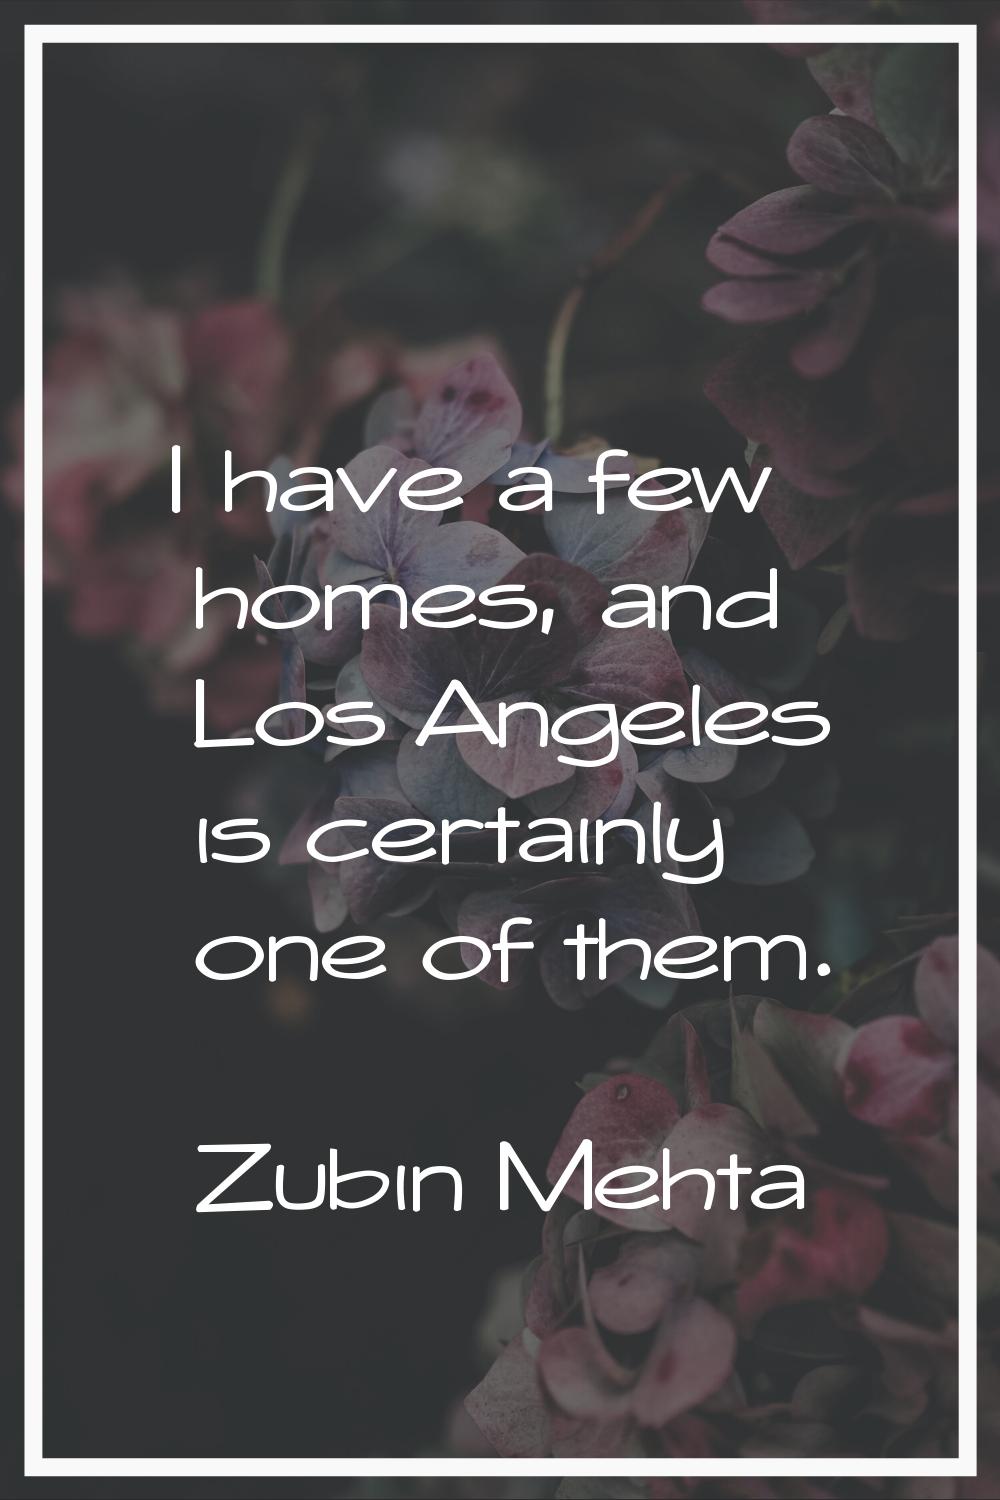 I have a few homes, and Los Angeles is certainly one of them.